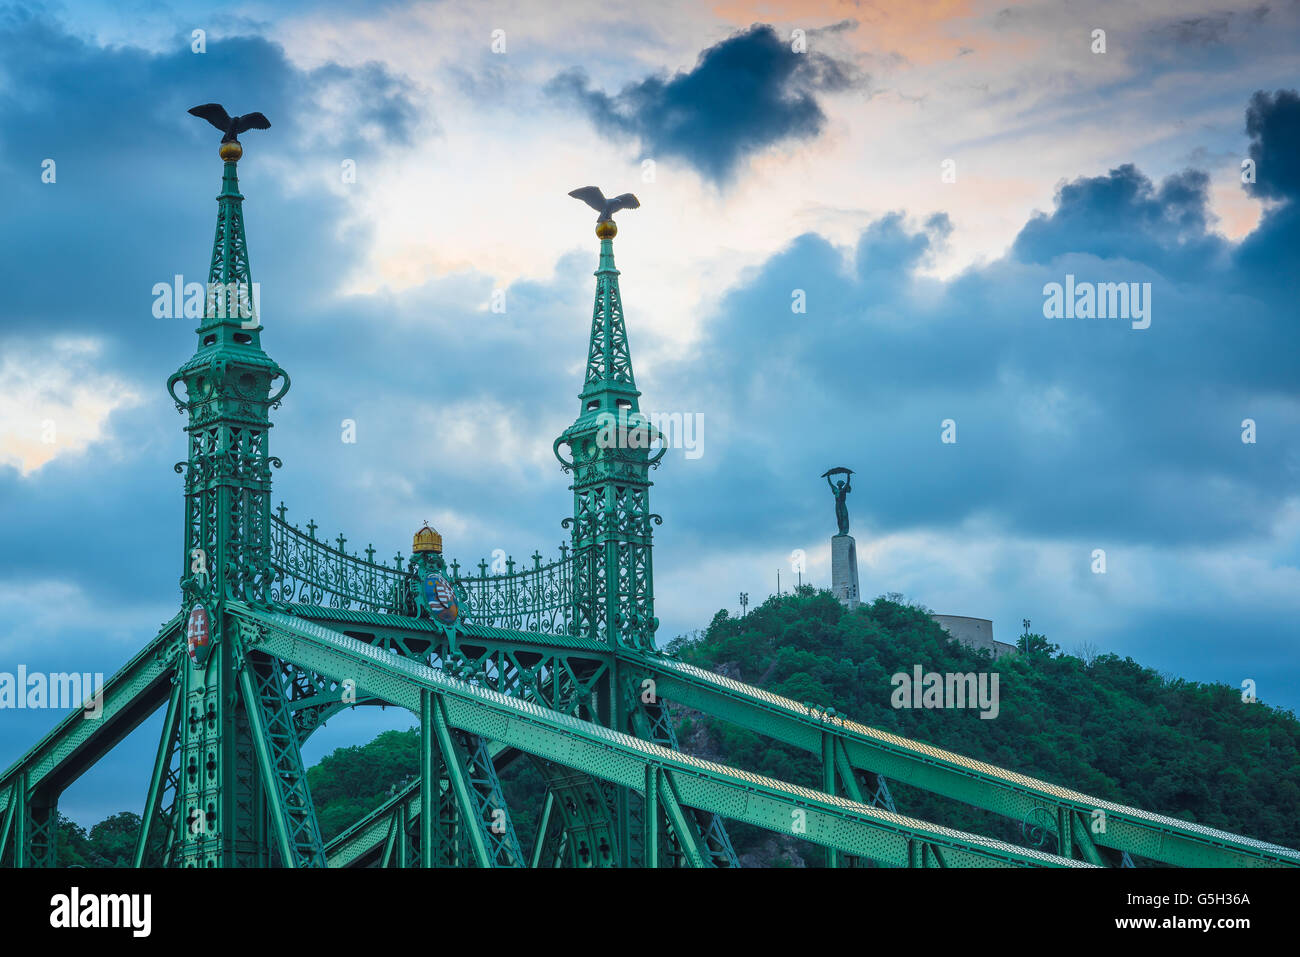 Liberty Bridge Budapest, detail of the Szabadsag Bridge at dusk with Gellert-hegy Hill in the background, Hungary. Stock Photo